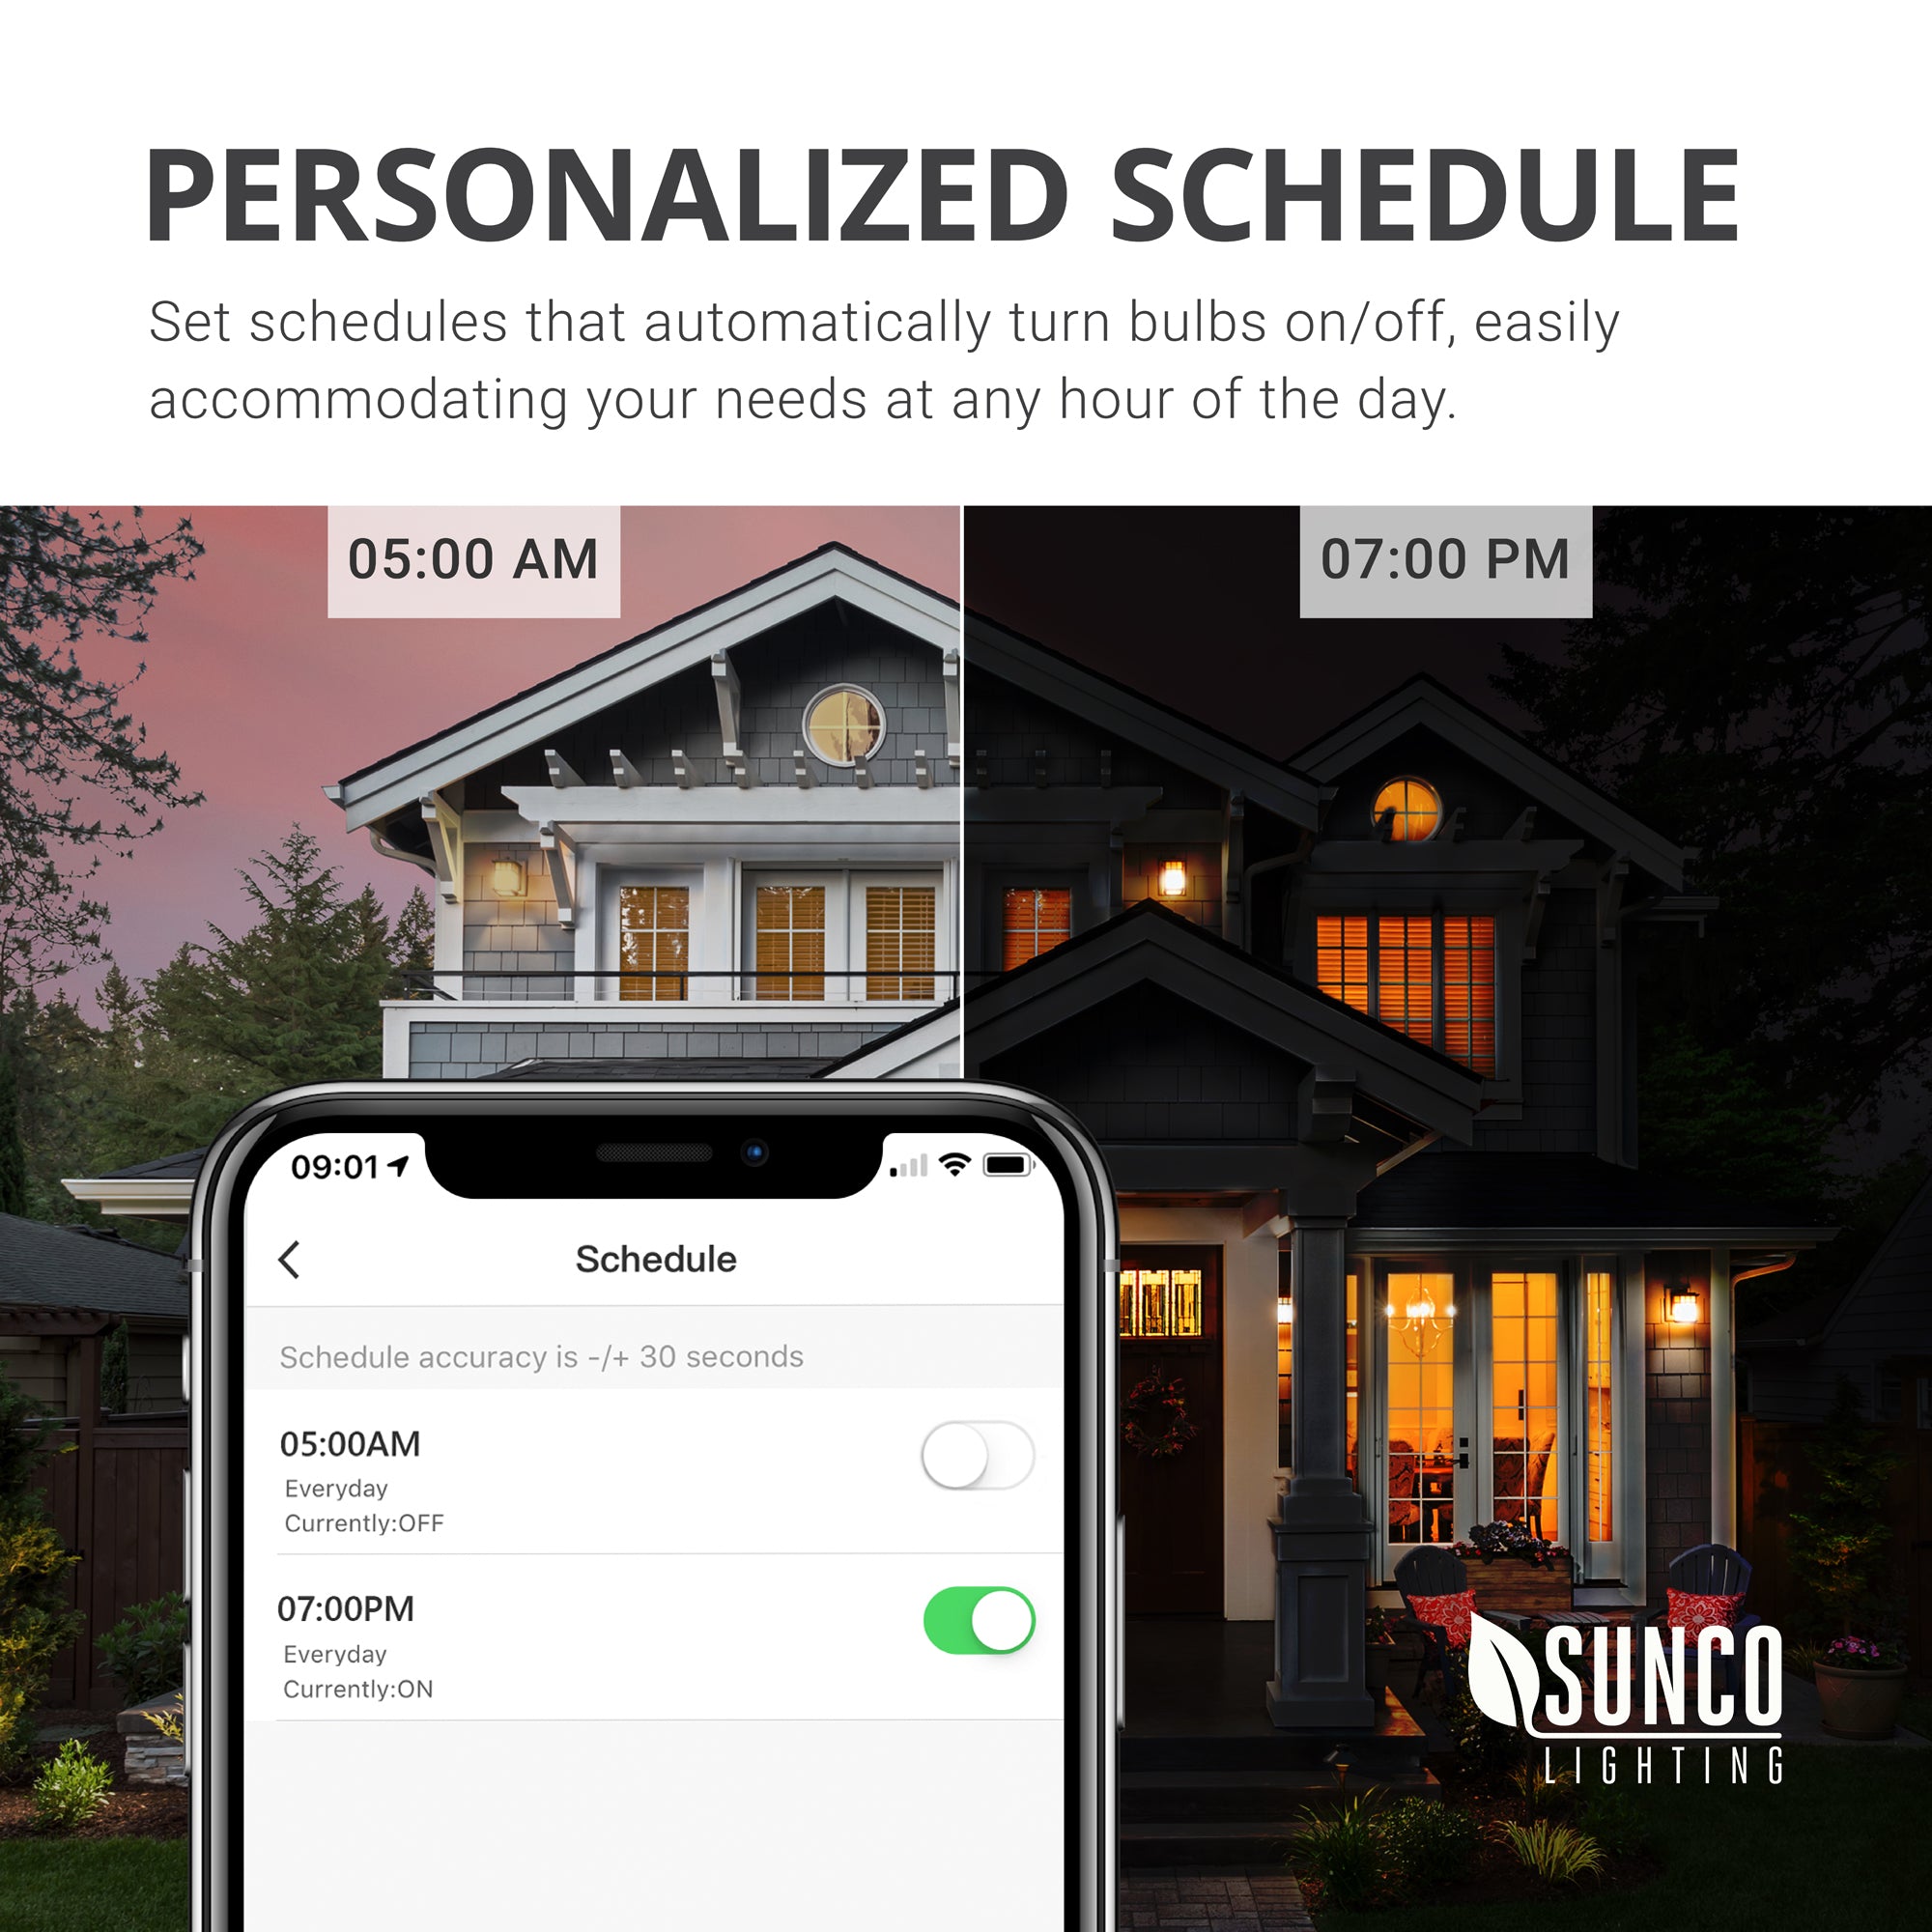 Personalize the schedule of your home lighting with the G25 LED Smart Bulb from Sunco Lighting. This bulb lets you set schedules that automatically turn bulbs on or off and easily accommodates your needs by presetting when lights will illuminate, even if you are not home. Use the simple app to control your lights remotely. Going on vacation? Set the schedule and leave your home lit at certain times of the day to deter crime.